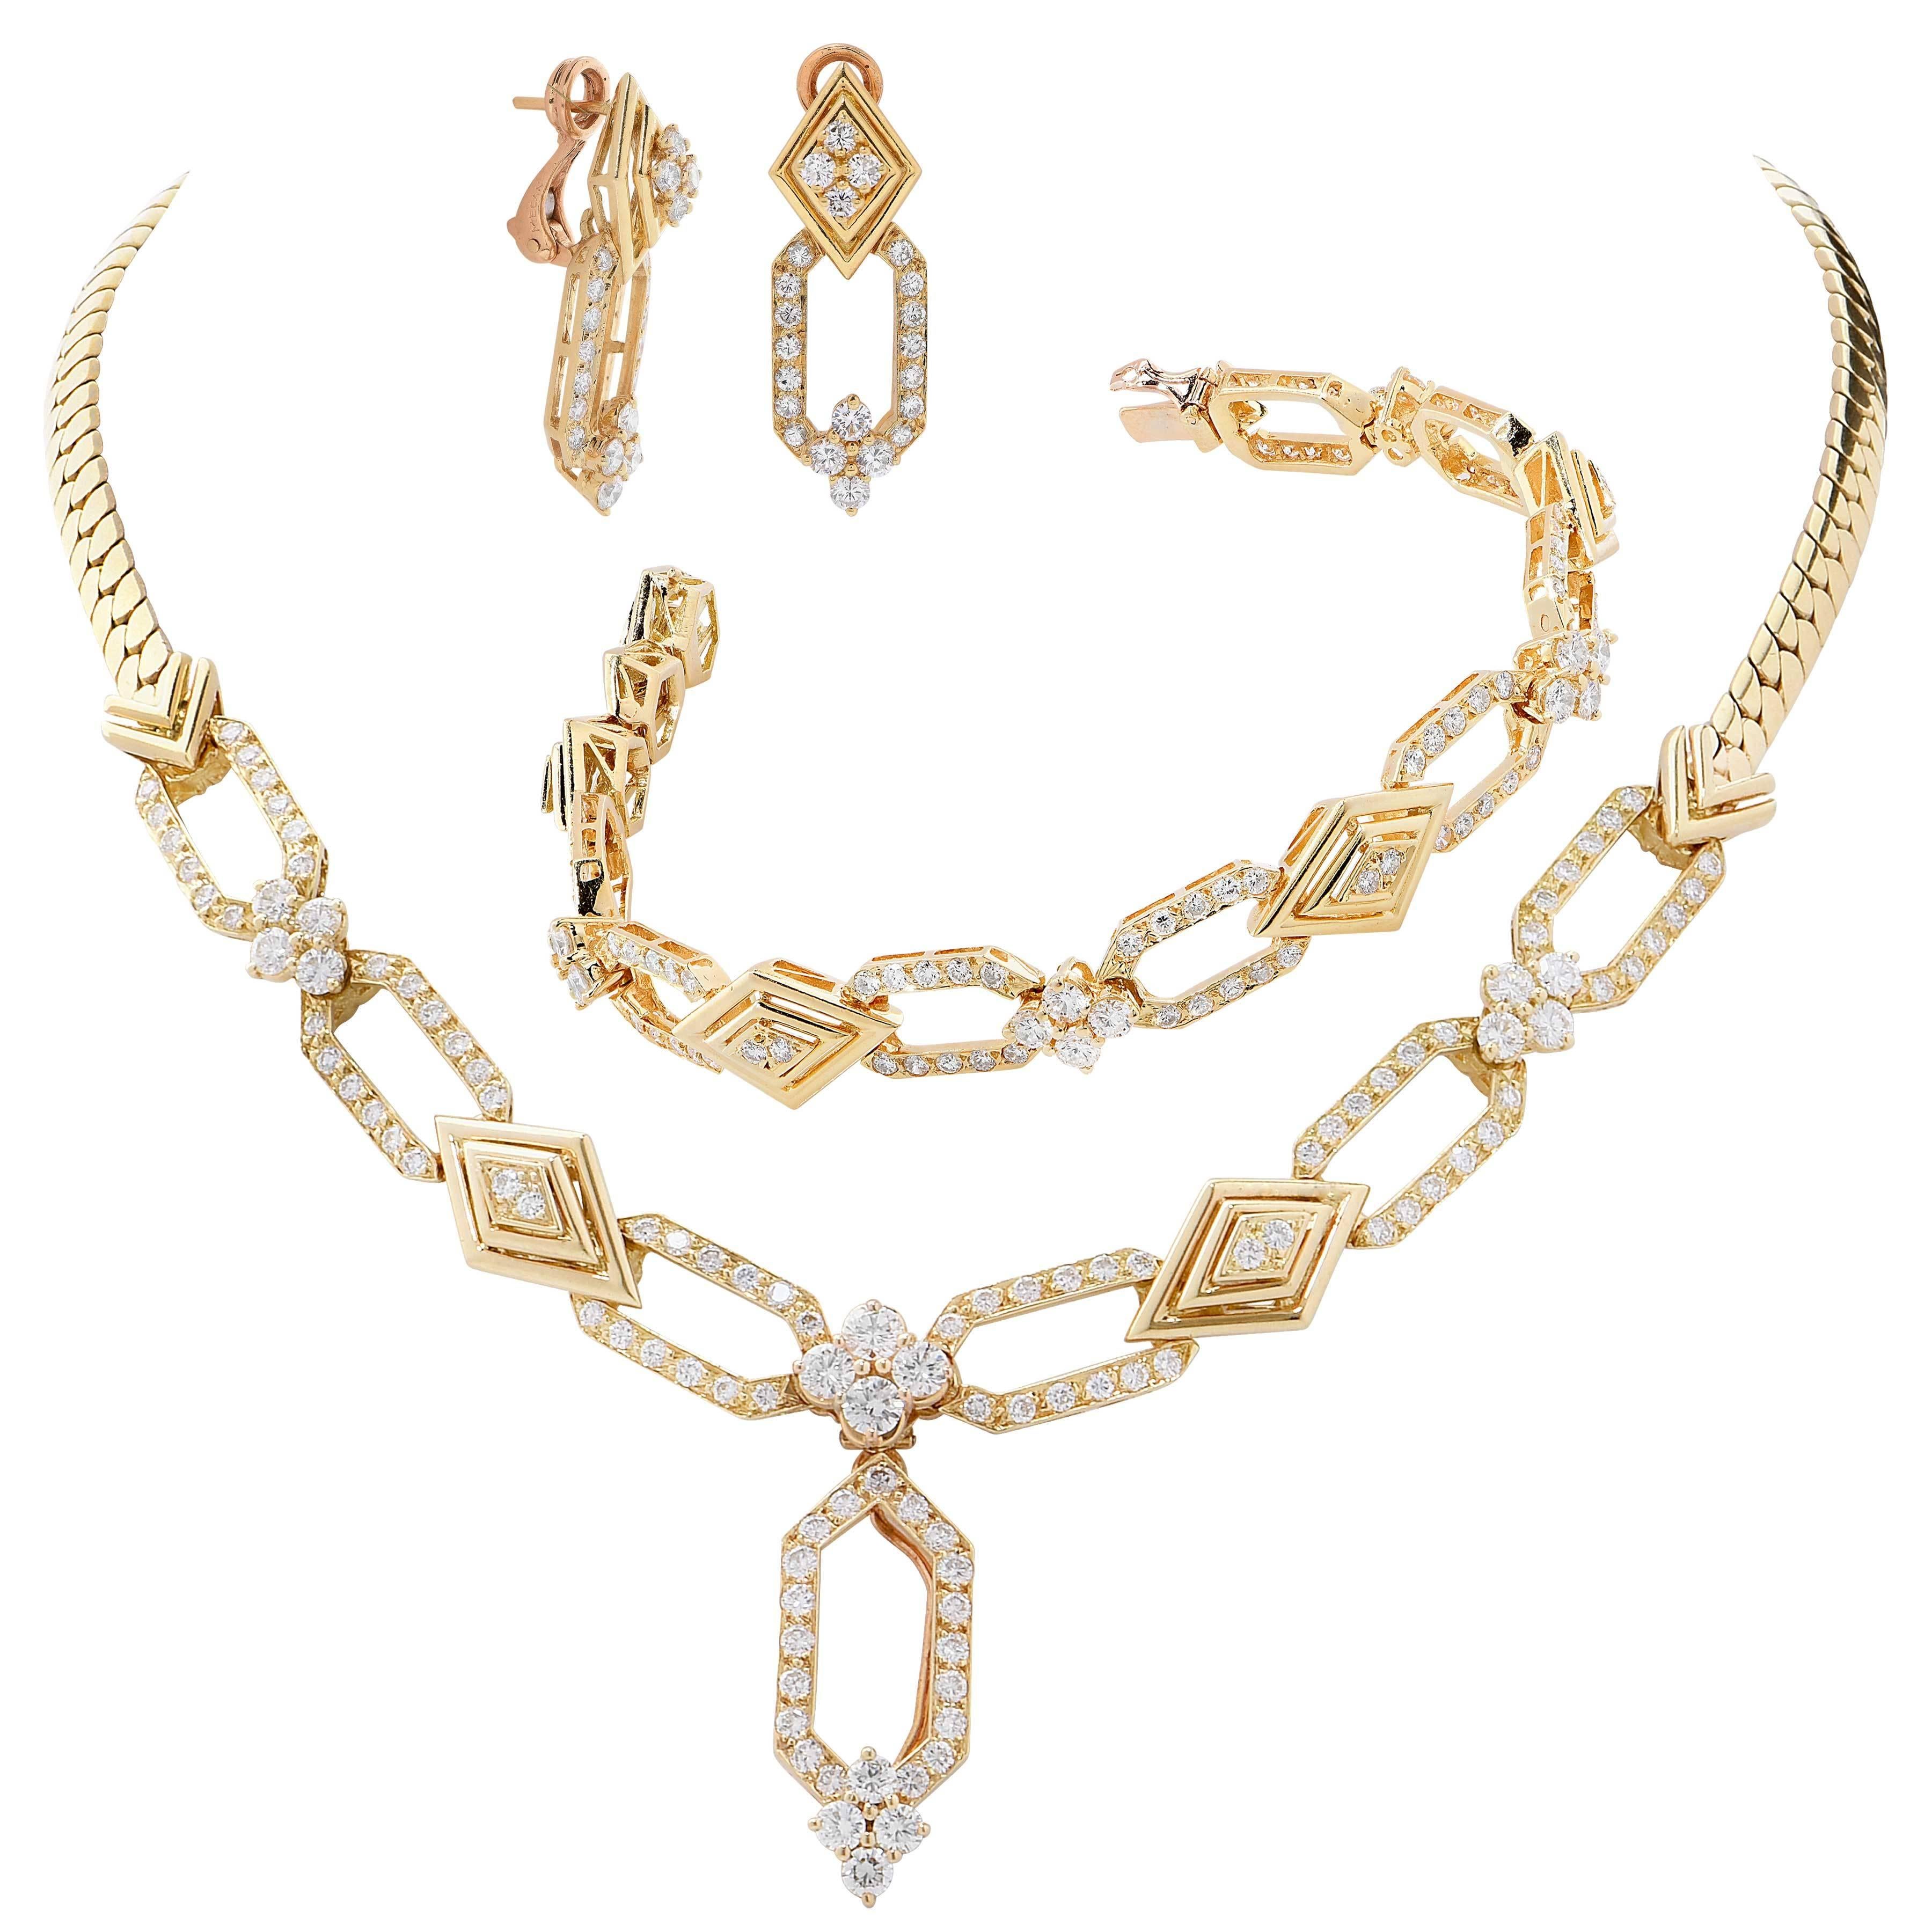 Mecan Elde Suite of Diamond Gold French Jewelry